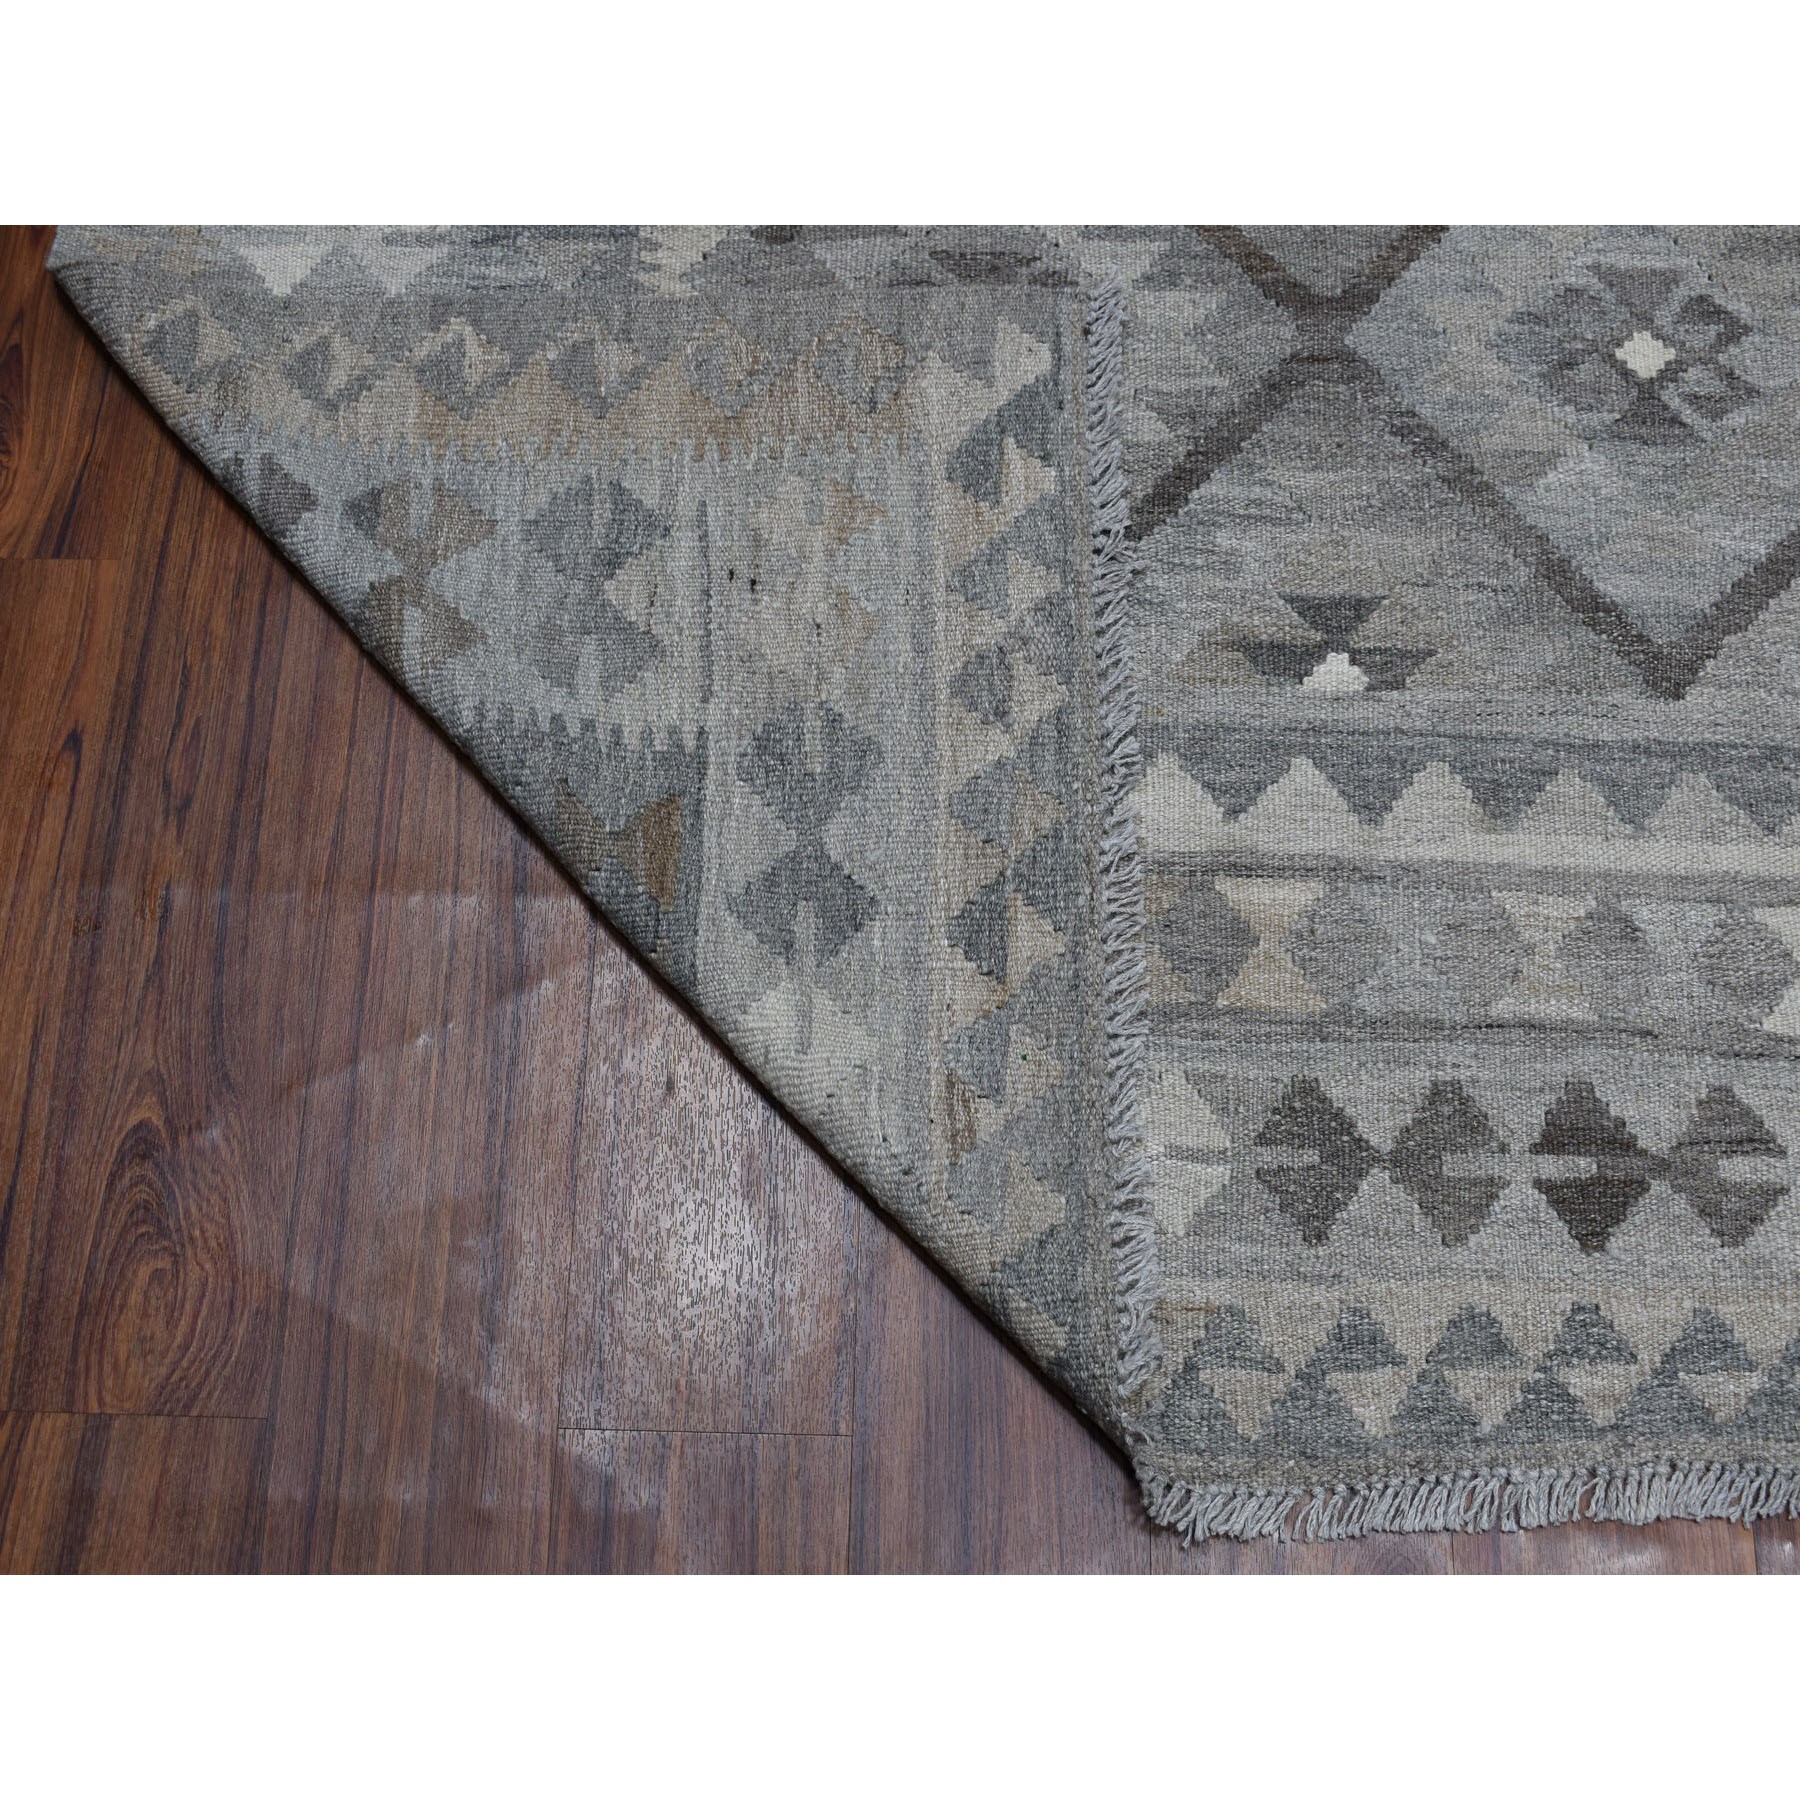 8-x10- Undyed Natural Wool Afghan Kilim Reversible Hand Woven Oriental Rug 